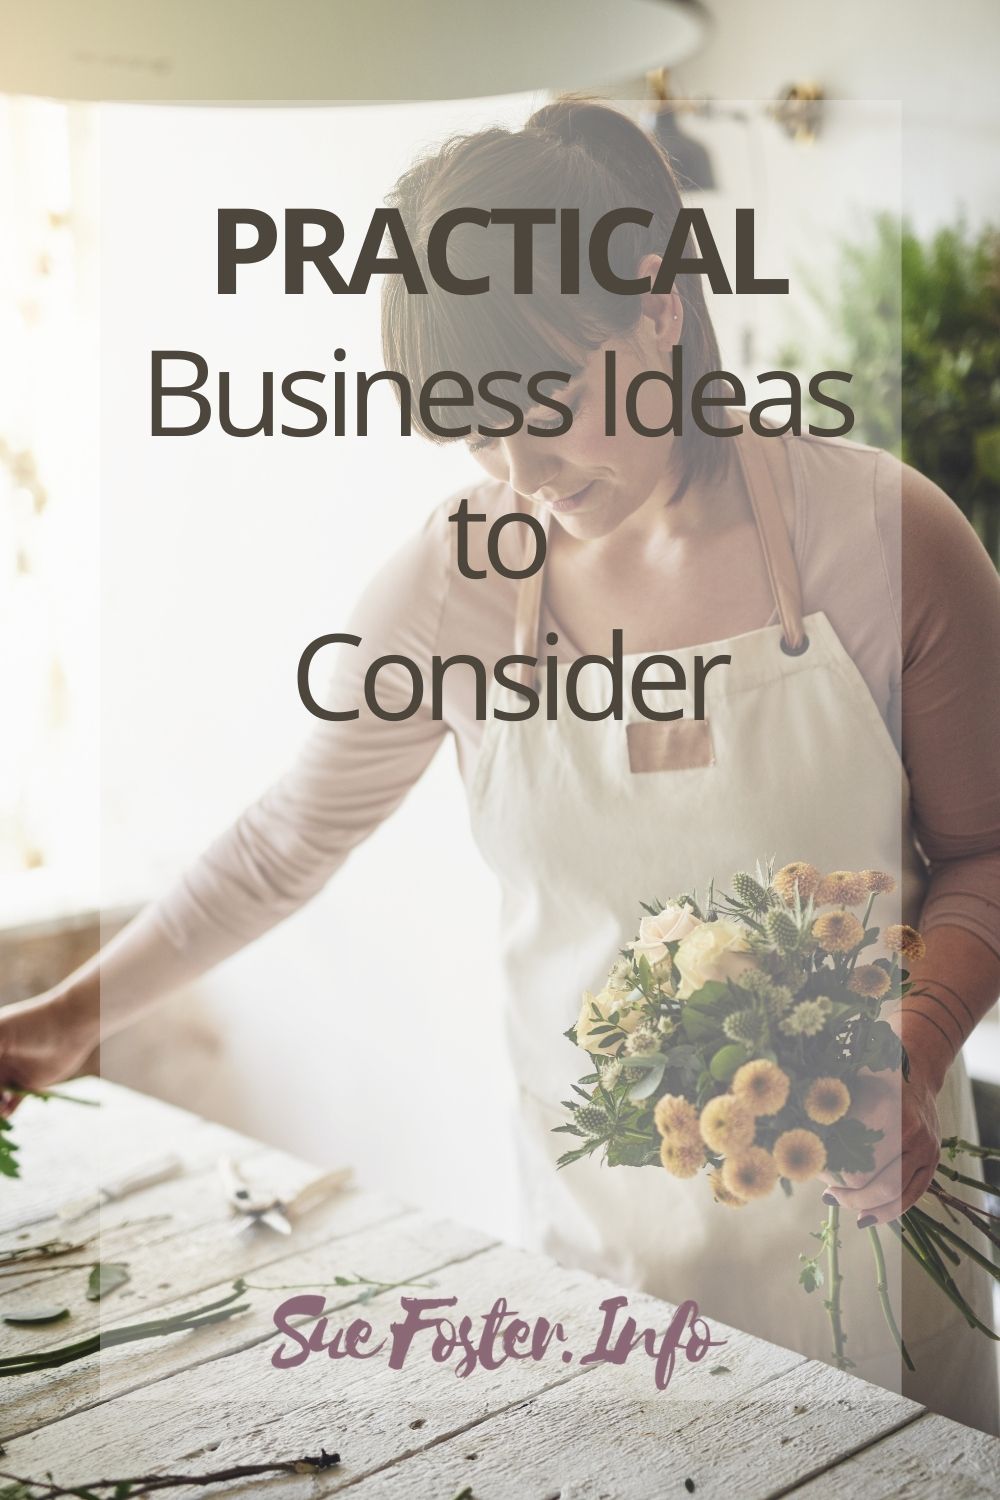 Practical business ideas to consider